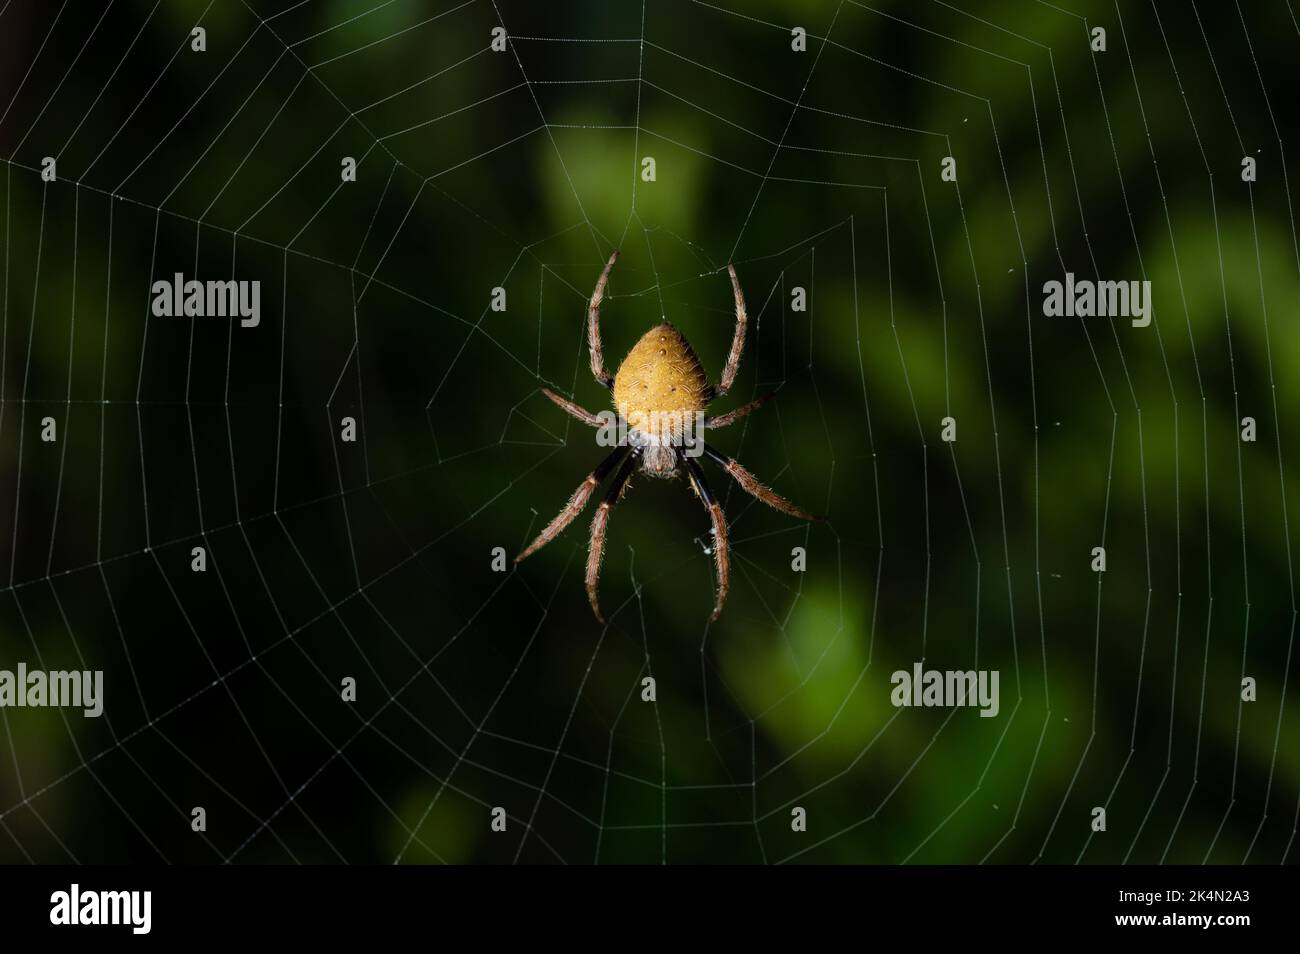 Spider sitting on web trap macro close up view Stock Photo